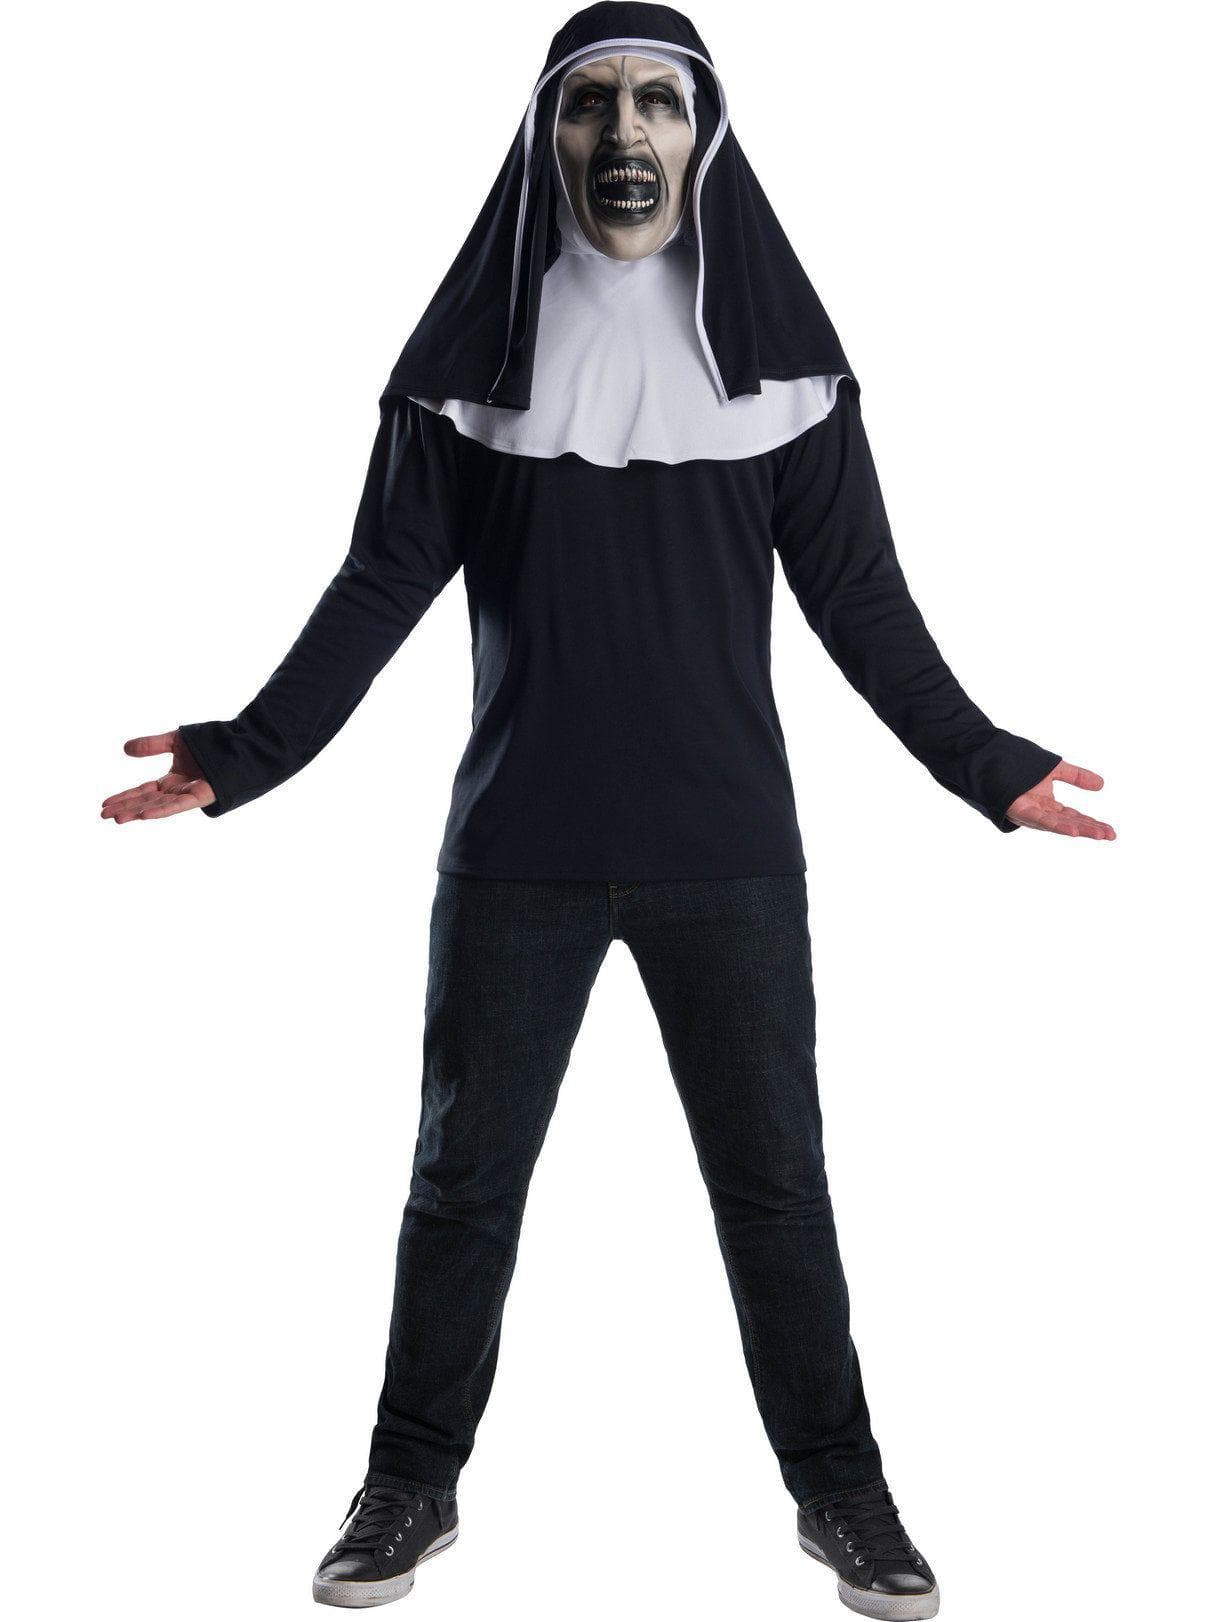 Men's The Nun Costume Top with Mask - costumes.com